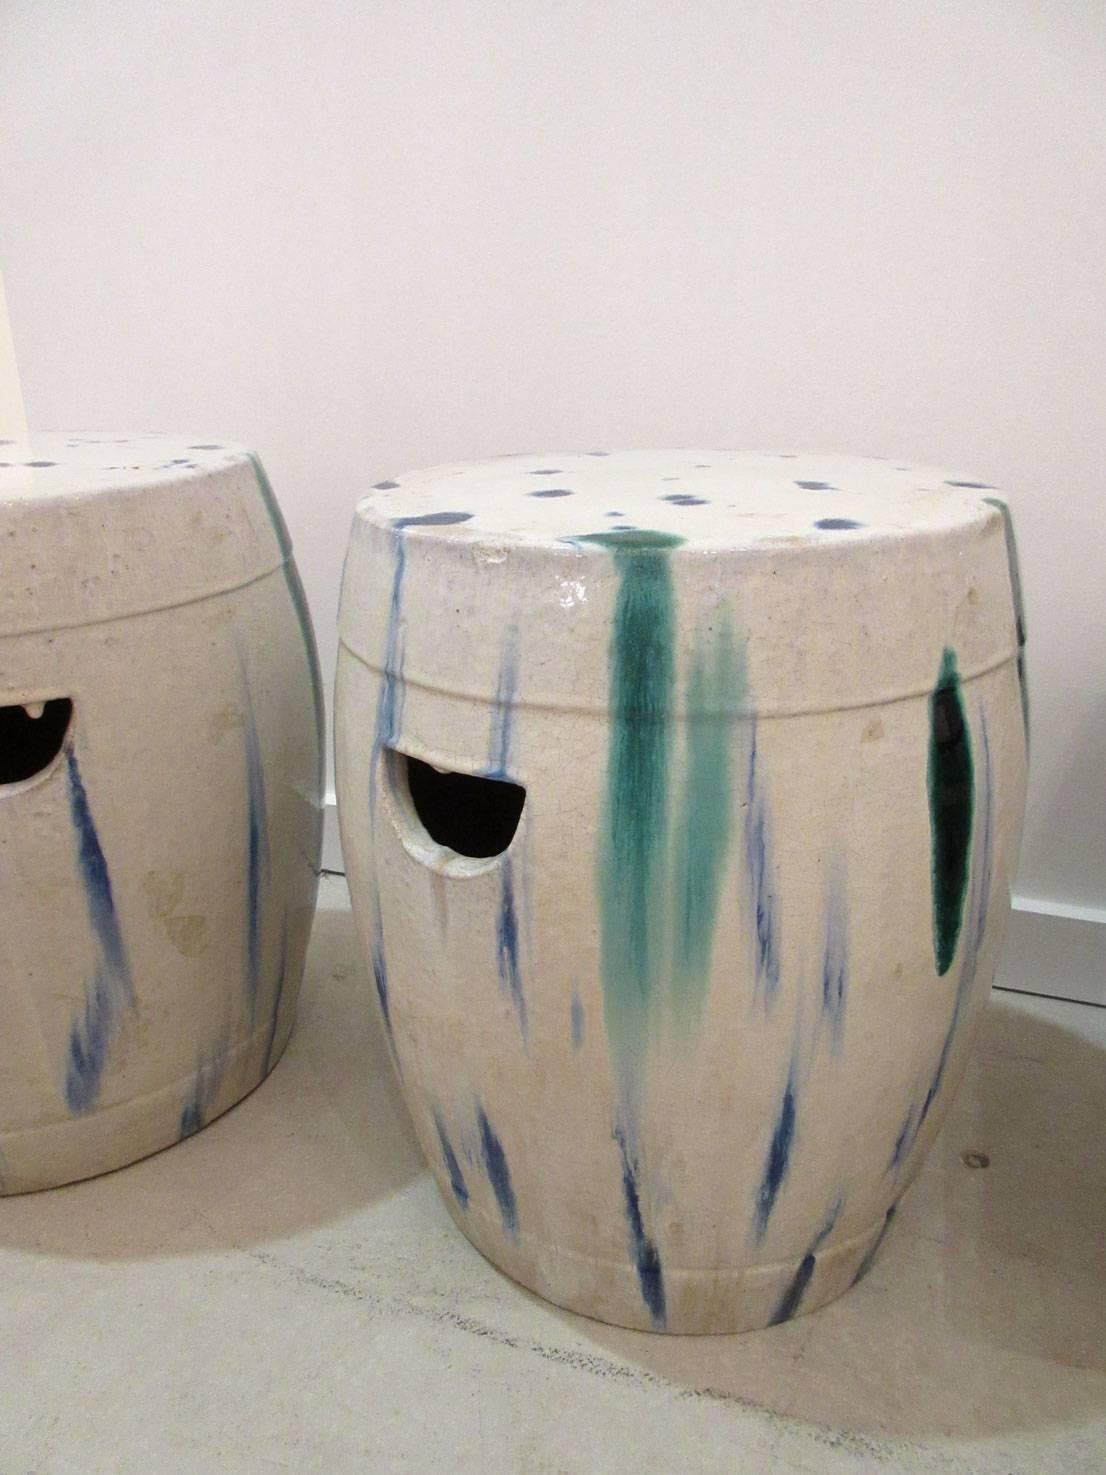 Pair of Chinese Ceramic Garden Seats with Blue and Green Tie-Dye Glaze 1